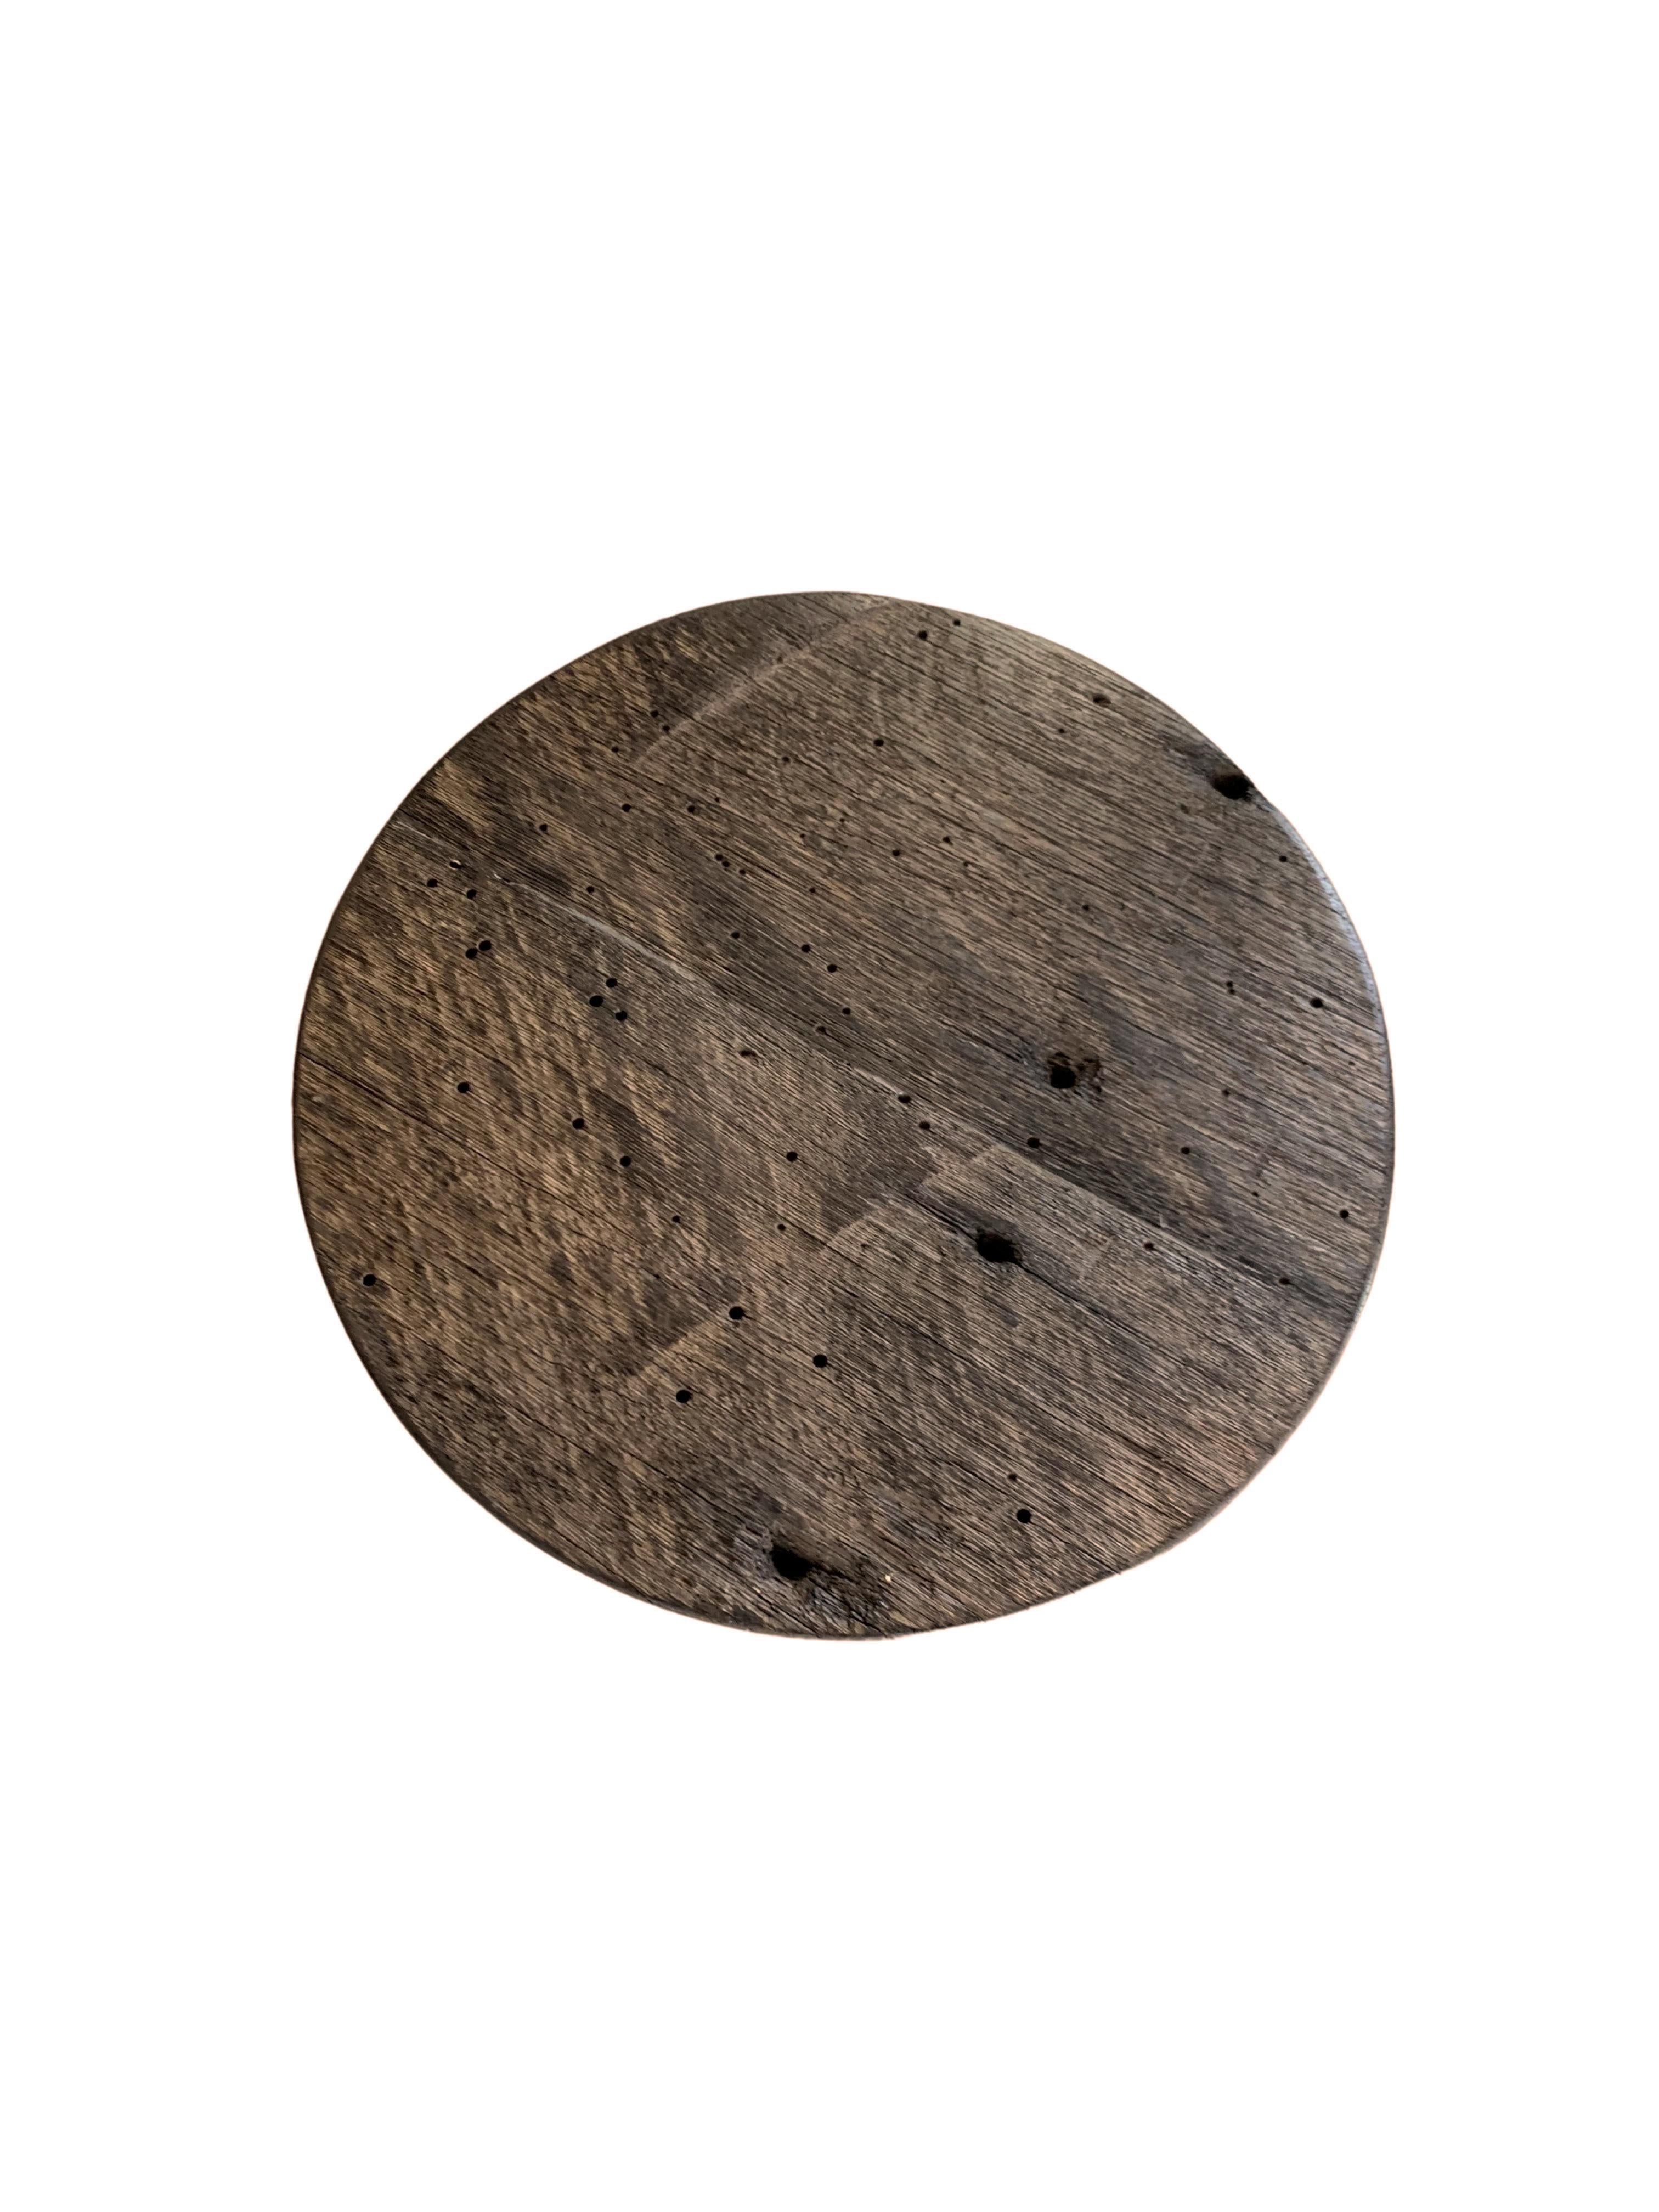 Hand-Crafted Ironwood Stool Modern Organic, Hand Crafted with Artisanal Wood Joinery For Sale